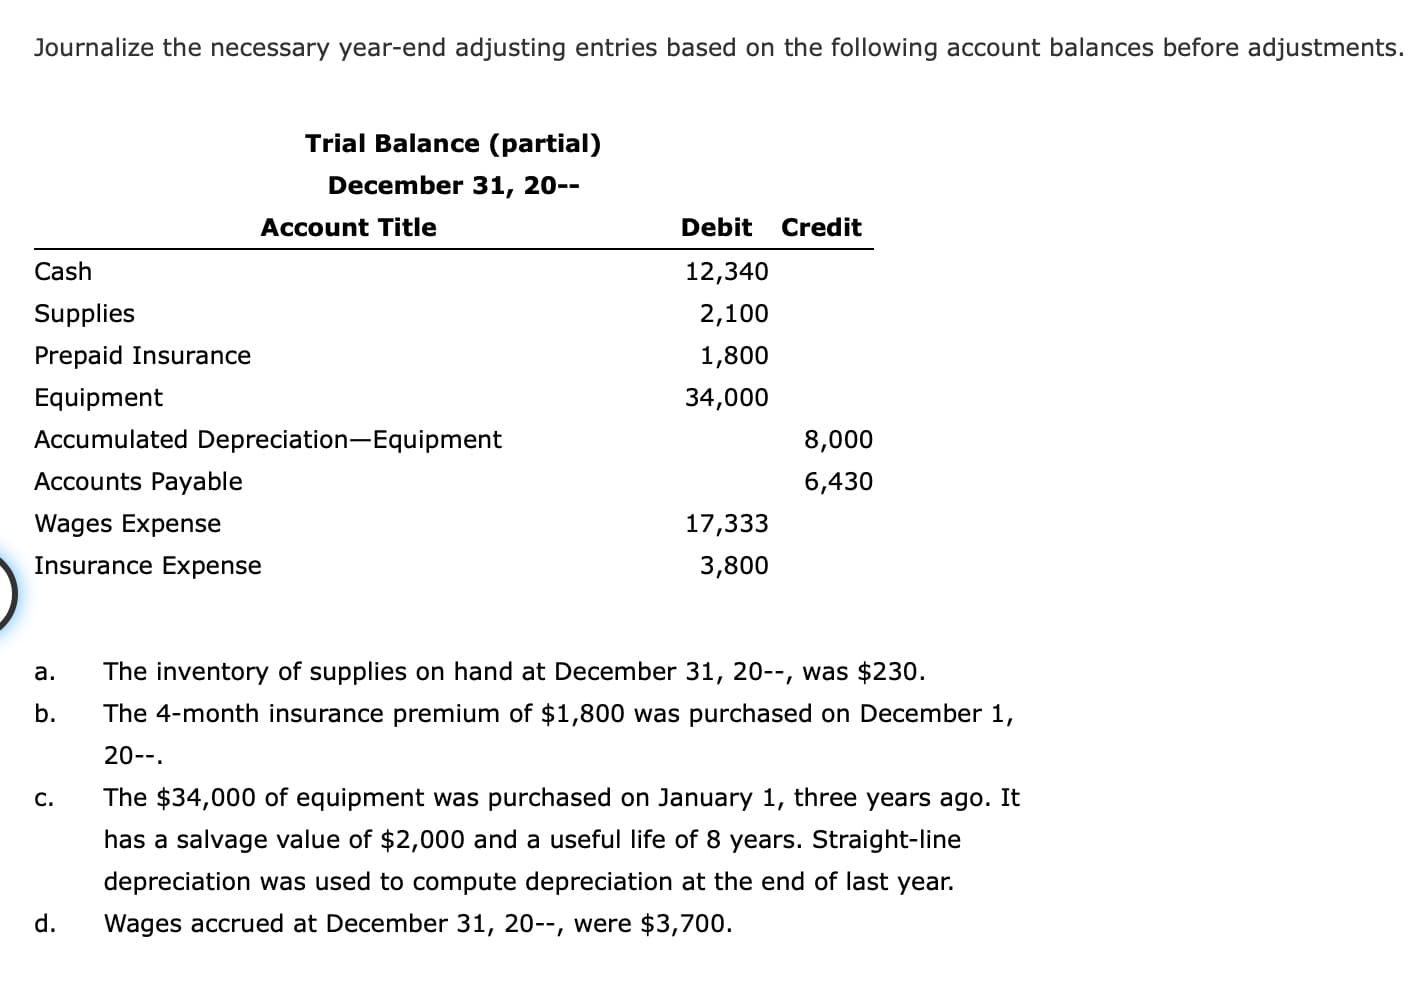 Journalize the necessary year-end adjusting entries based on the following account balances before adjustments.
Cash
Supplies
Prepaid Insurance
a.
b.
Equipment
Accumulated Depreciation-Equipment
Accounts Payable
Wages Expense
Insurance Expense
C.
Trial Balance (partial)
December 31, 20--
d.
Account Title
Debit Credit
12,340
2,100
1,800
34,000
17,333
3,800
8,000
6,430
The inventory of supplies on hand at December 31, 20--, was $230.
The 4-month insurance premium of $1,800 was purchased on December 1,
20--.
The $34,000 of equipment was purchased on January 1, three years ago. It
has a salvage value of $2,000 and a useful life of 8 years. Straight-line
depreciation was used to compute depreciation at the end of last year.
Wages accrued at December 31, 20--, were $3,700.